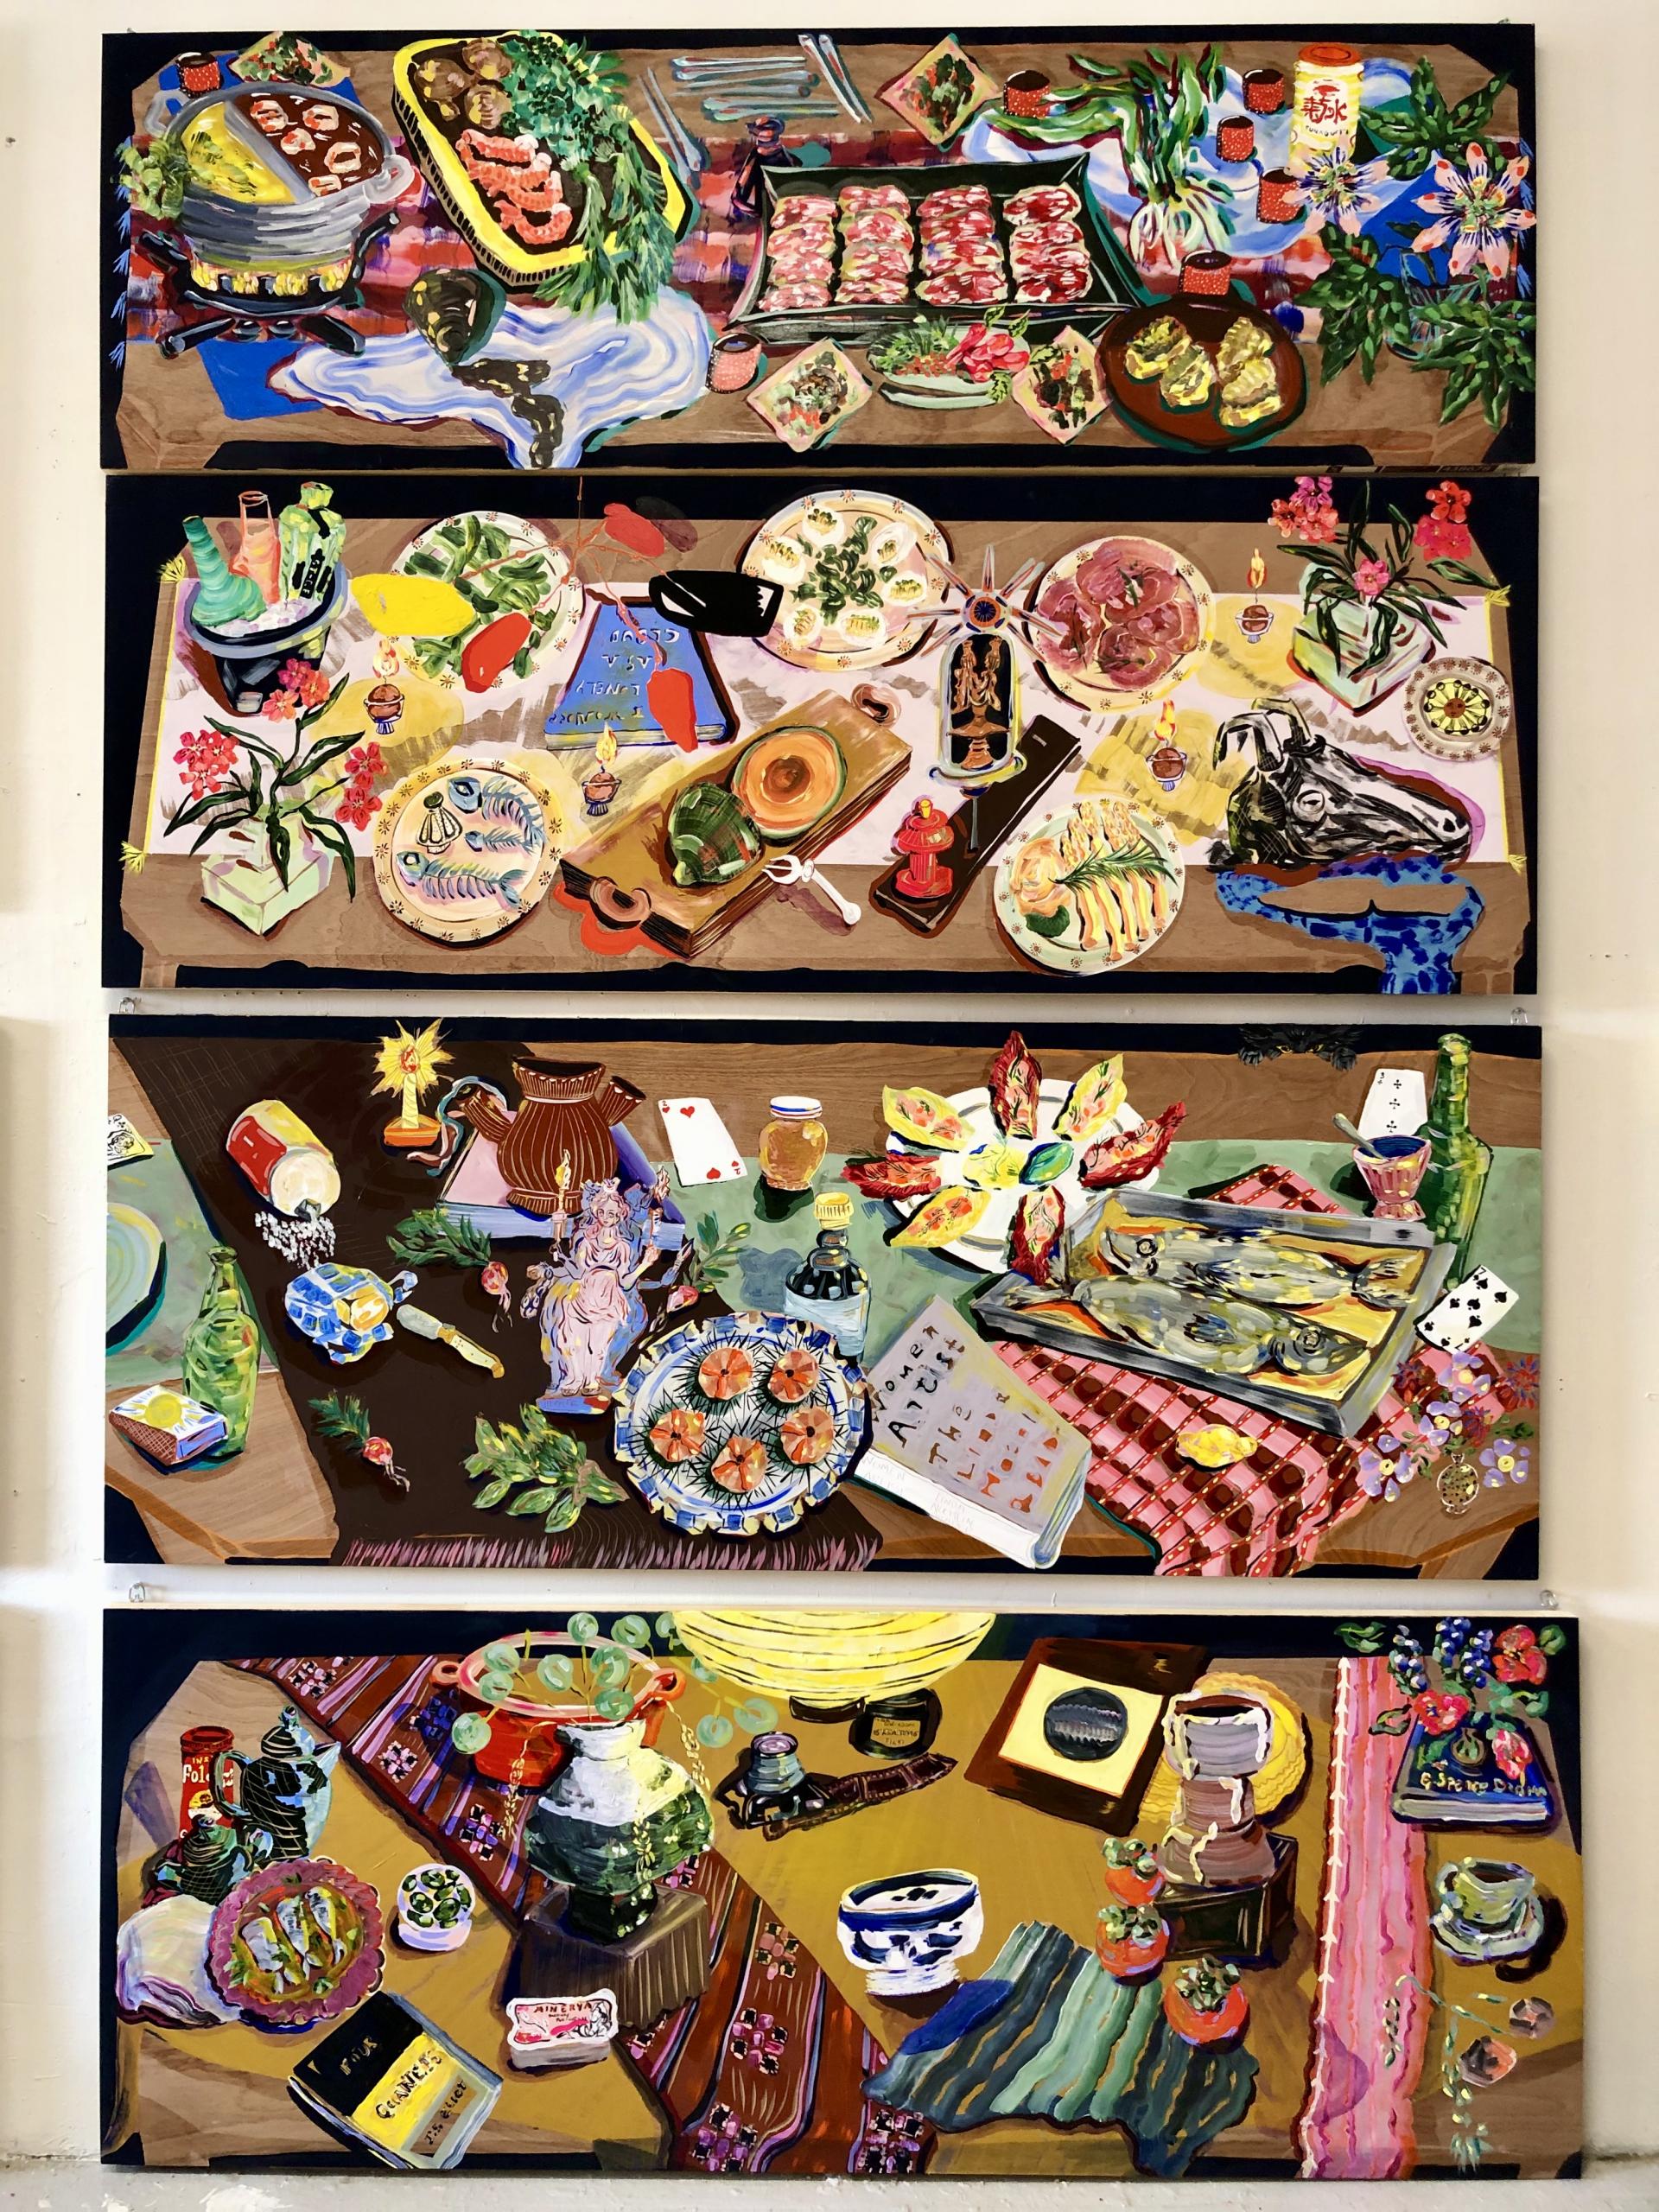 Studio shot, four paintings from the series: Slice of Life, Theater of the Dinner Table